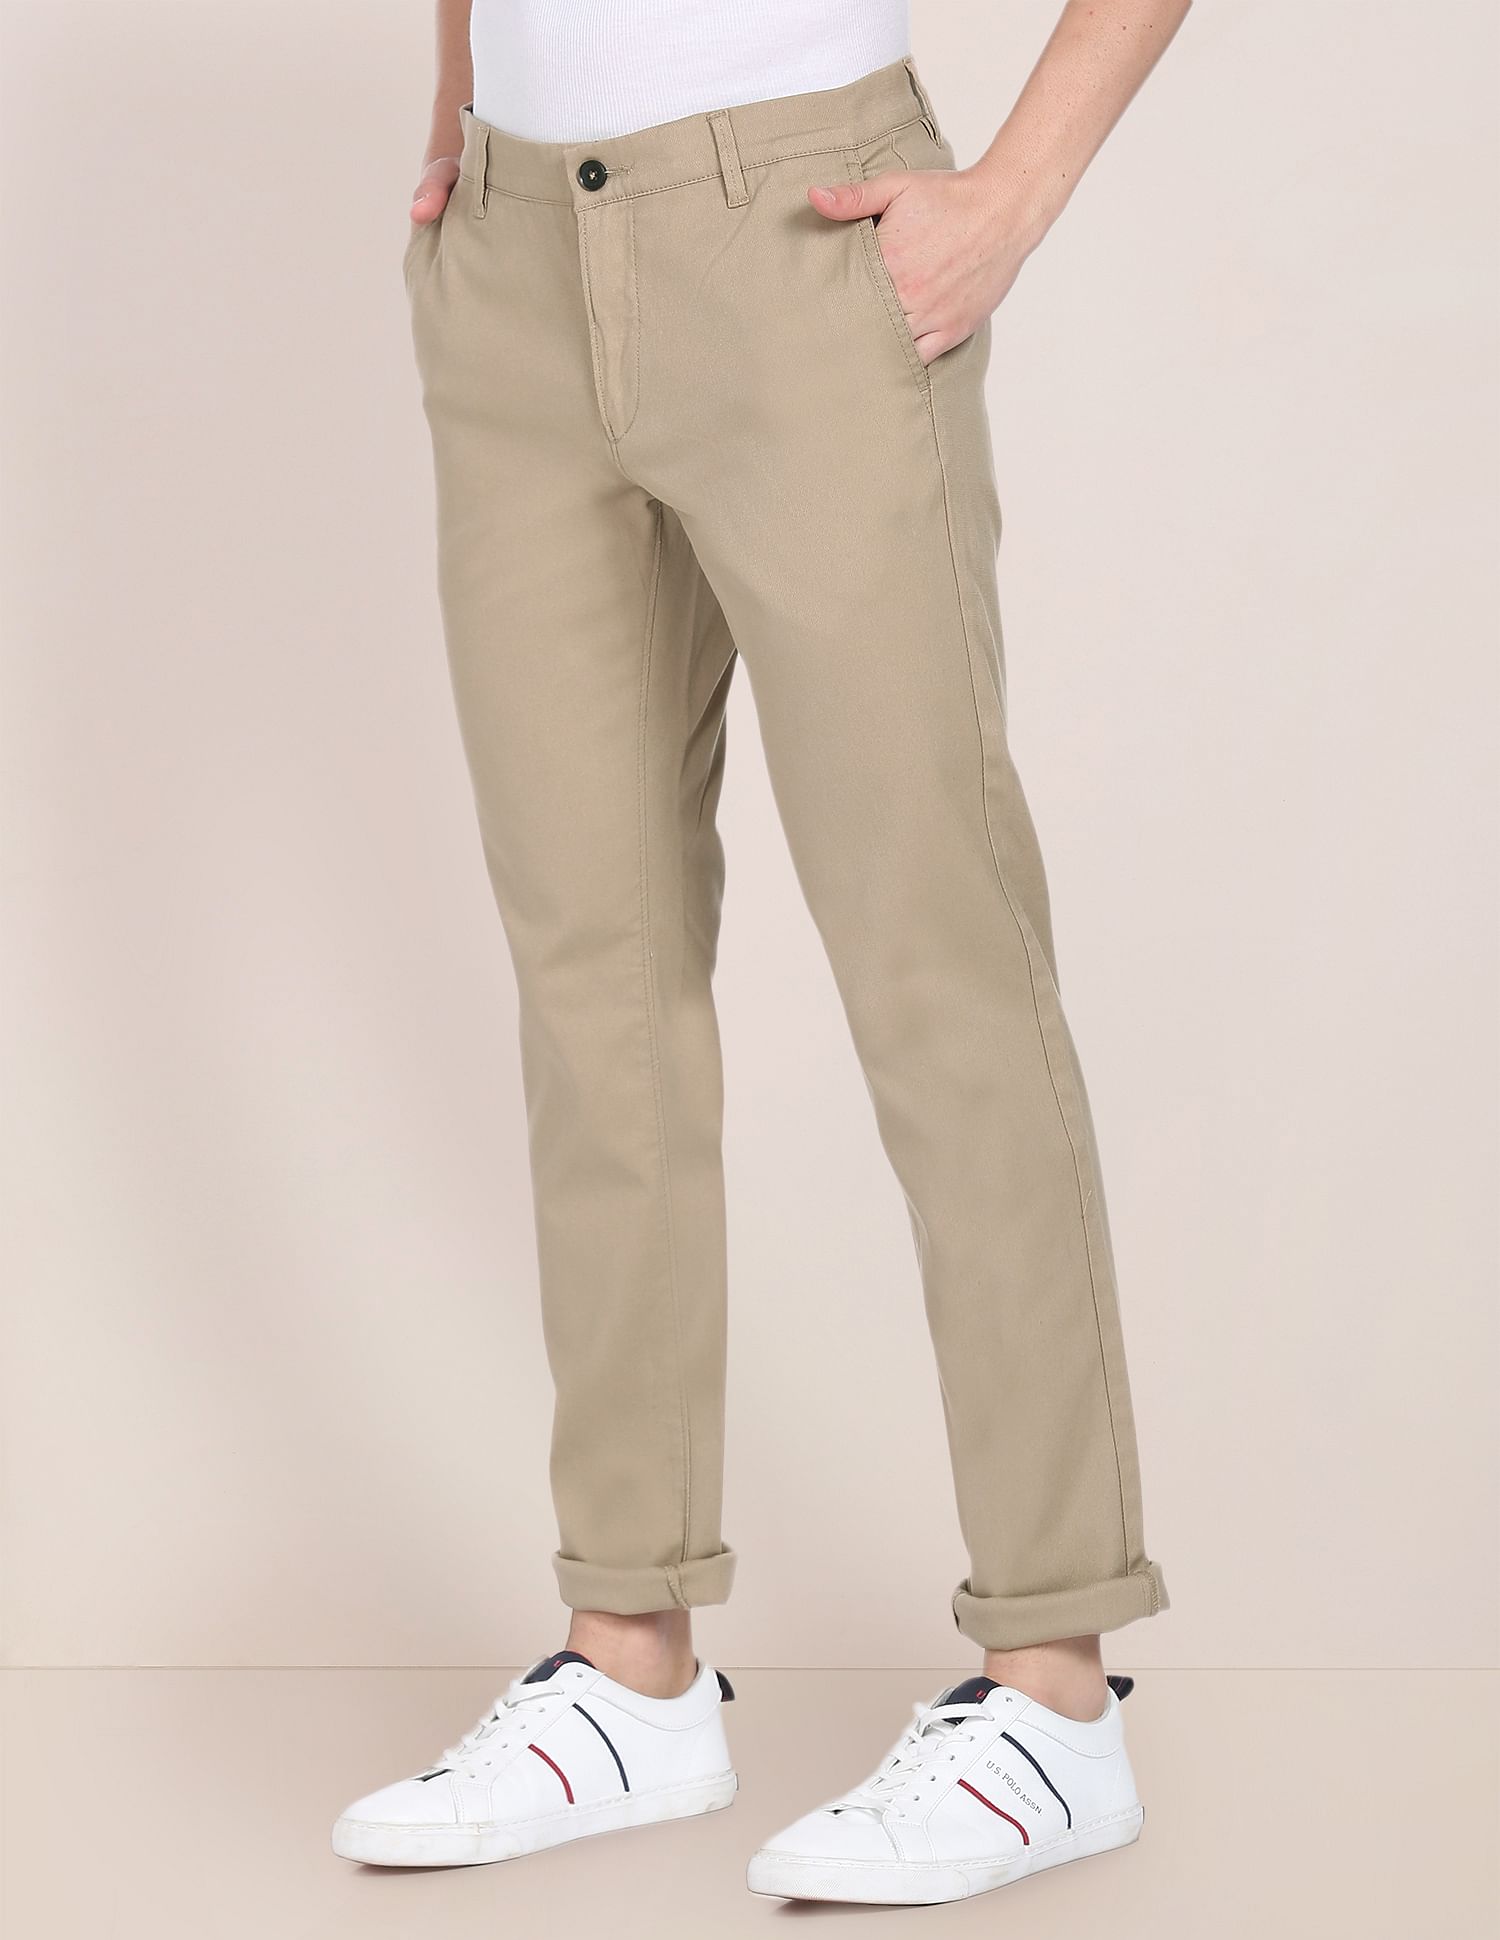 Buy US POLO ASSN Solid Cotton Regular Fit Mens Casual Trousers   Shoppers Stop